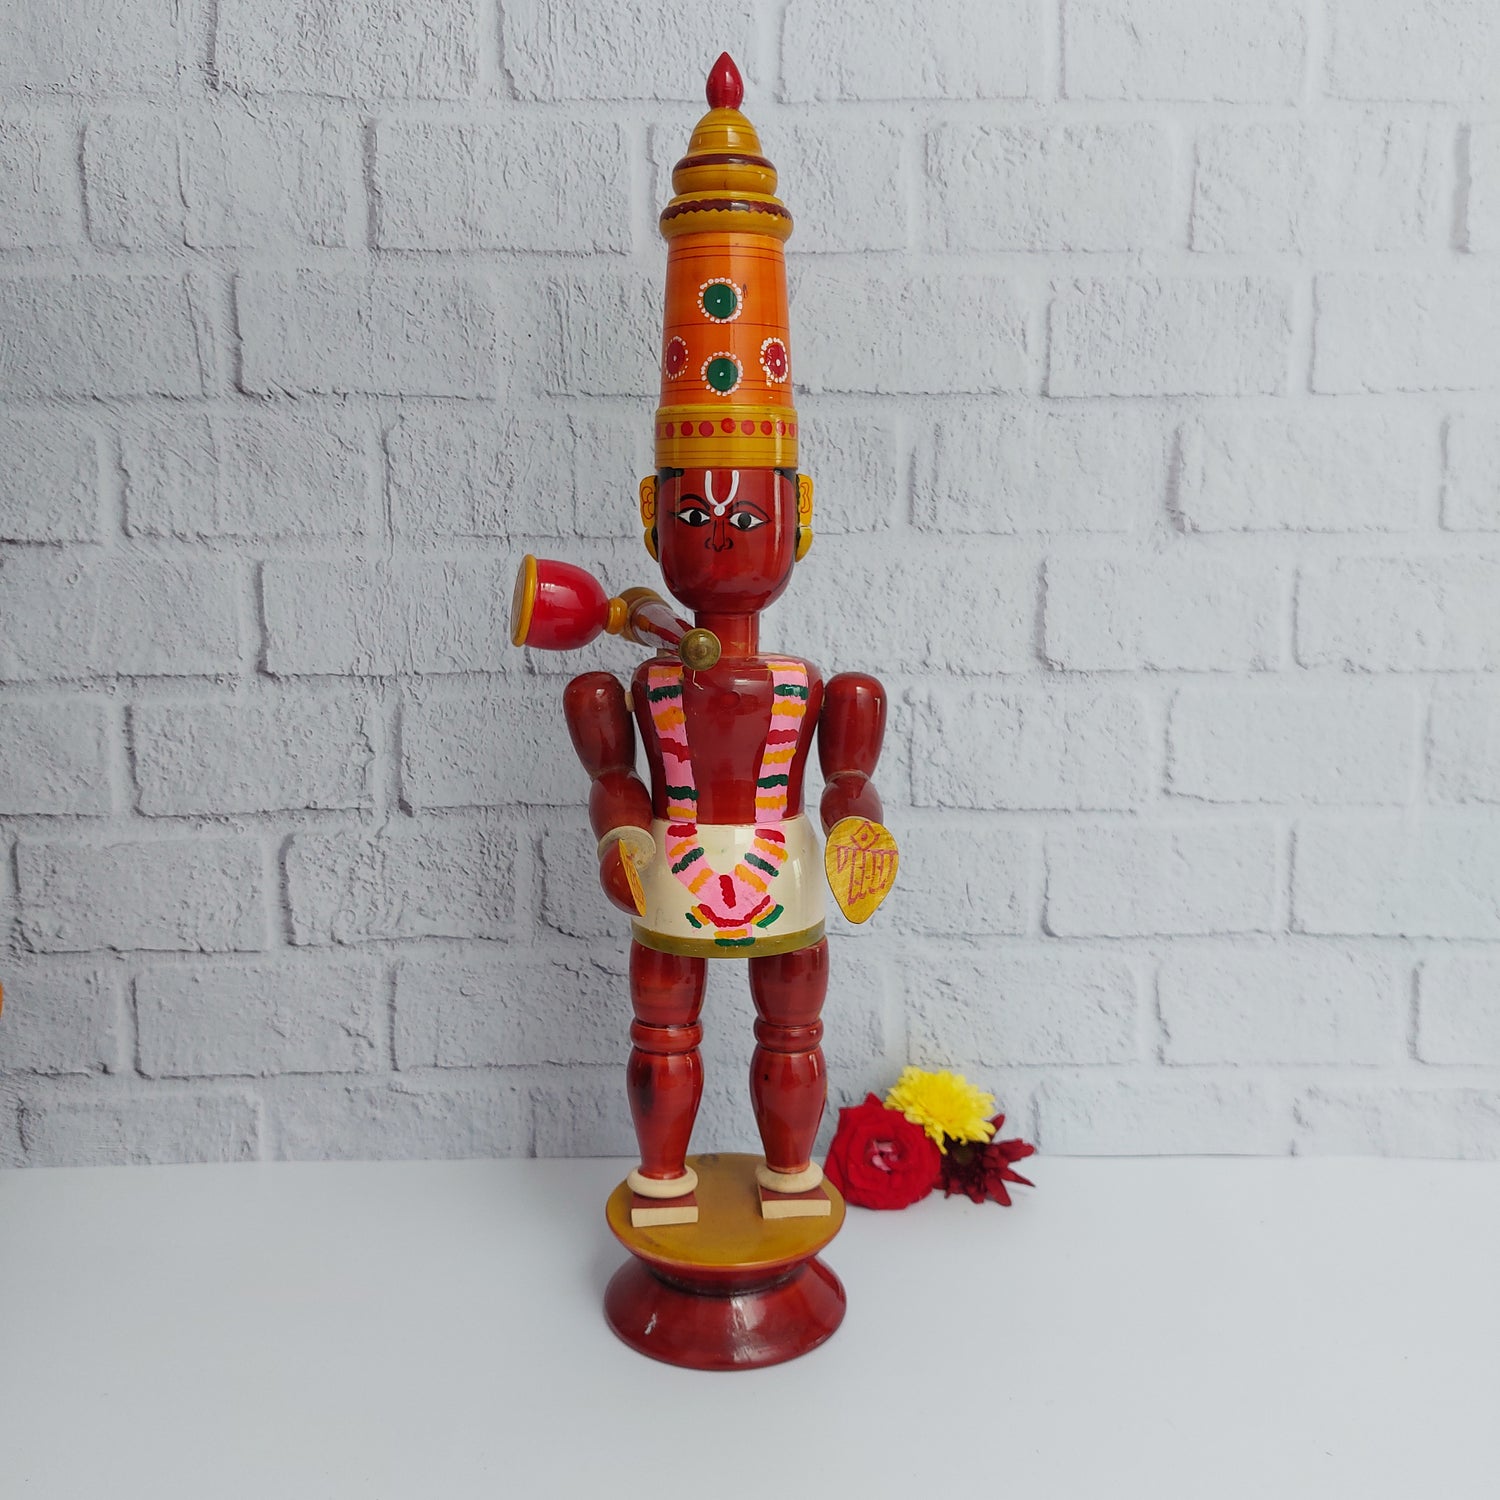 Traditional Indian Toys - Safety & Care